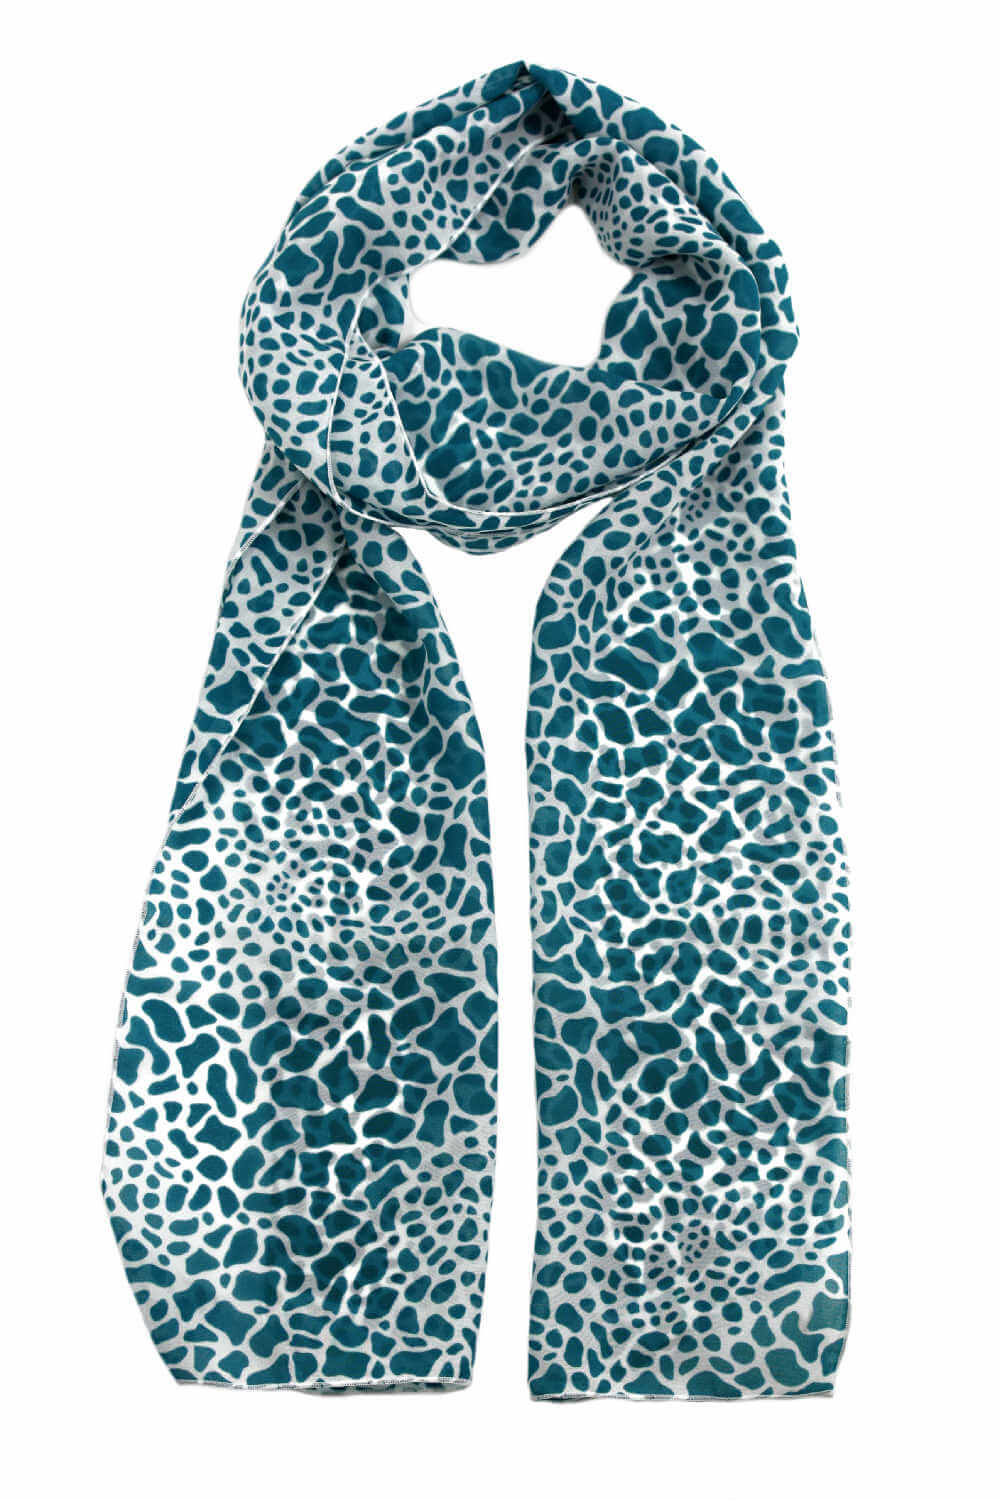 leopard-print-scarf-turquoise-white